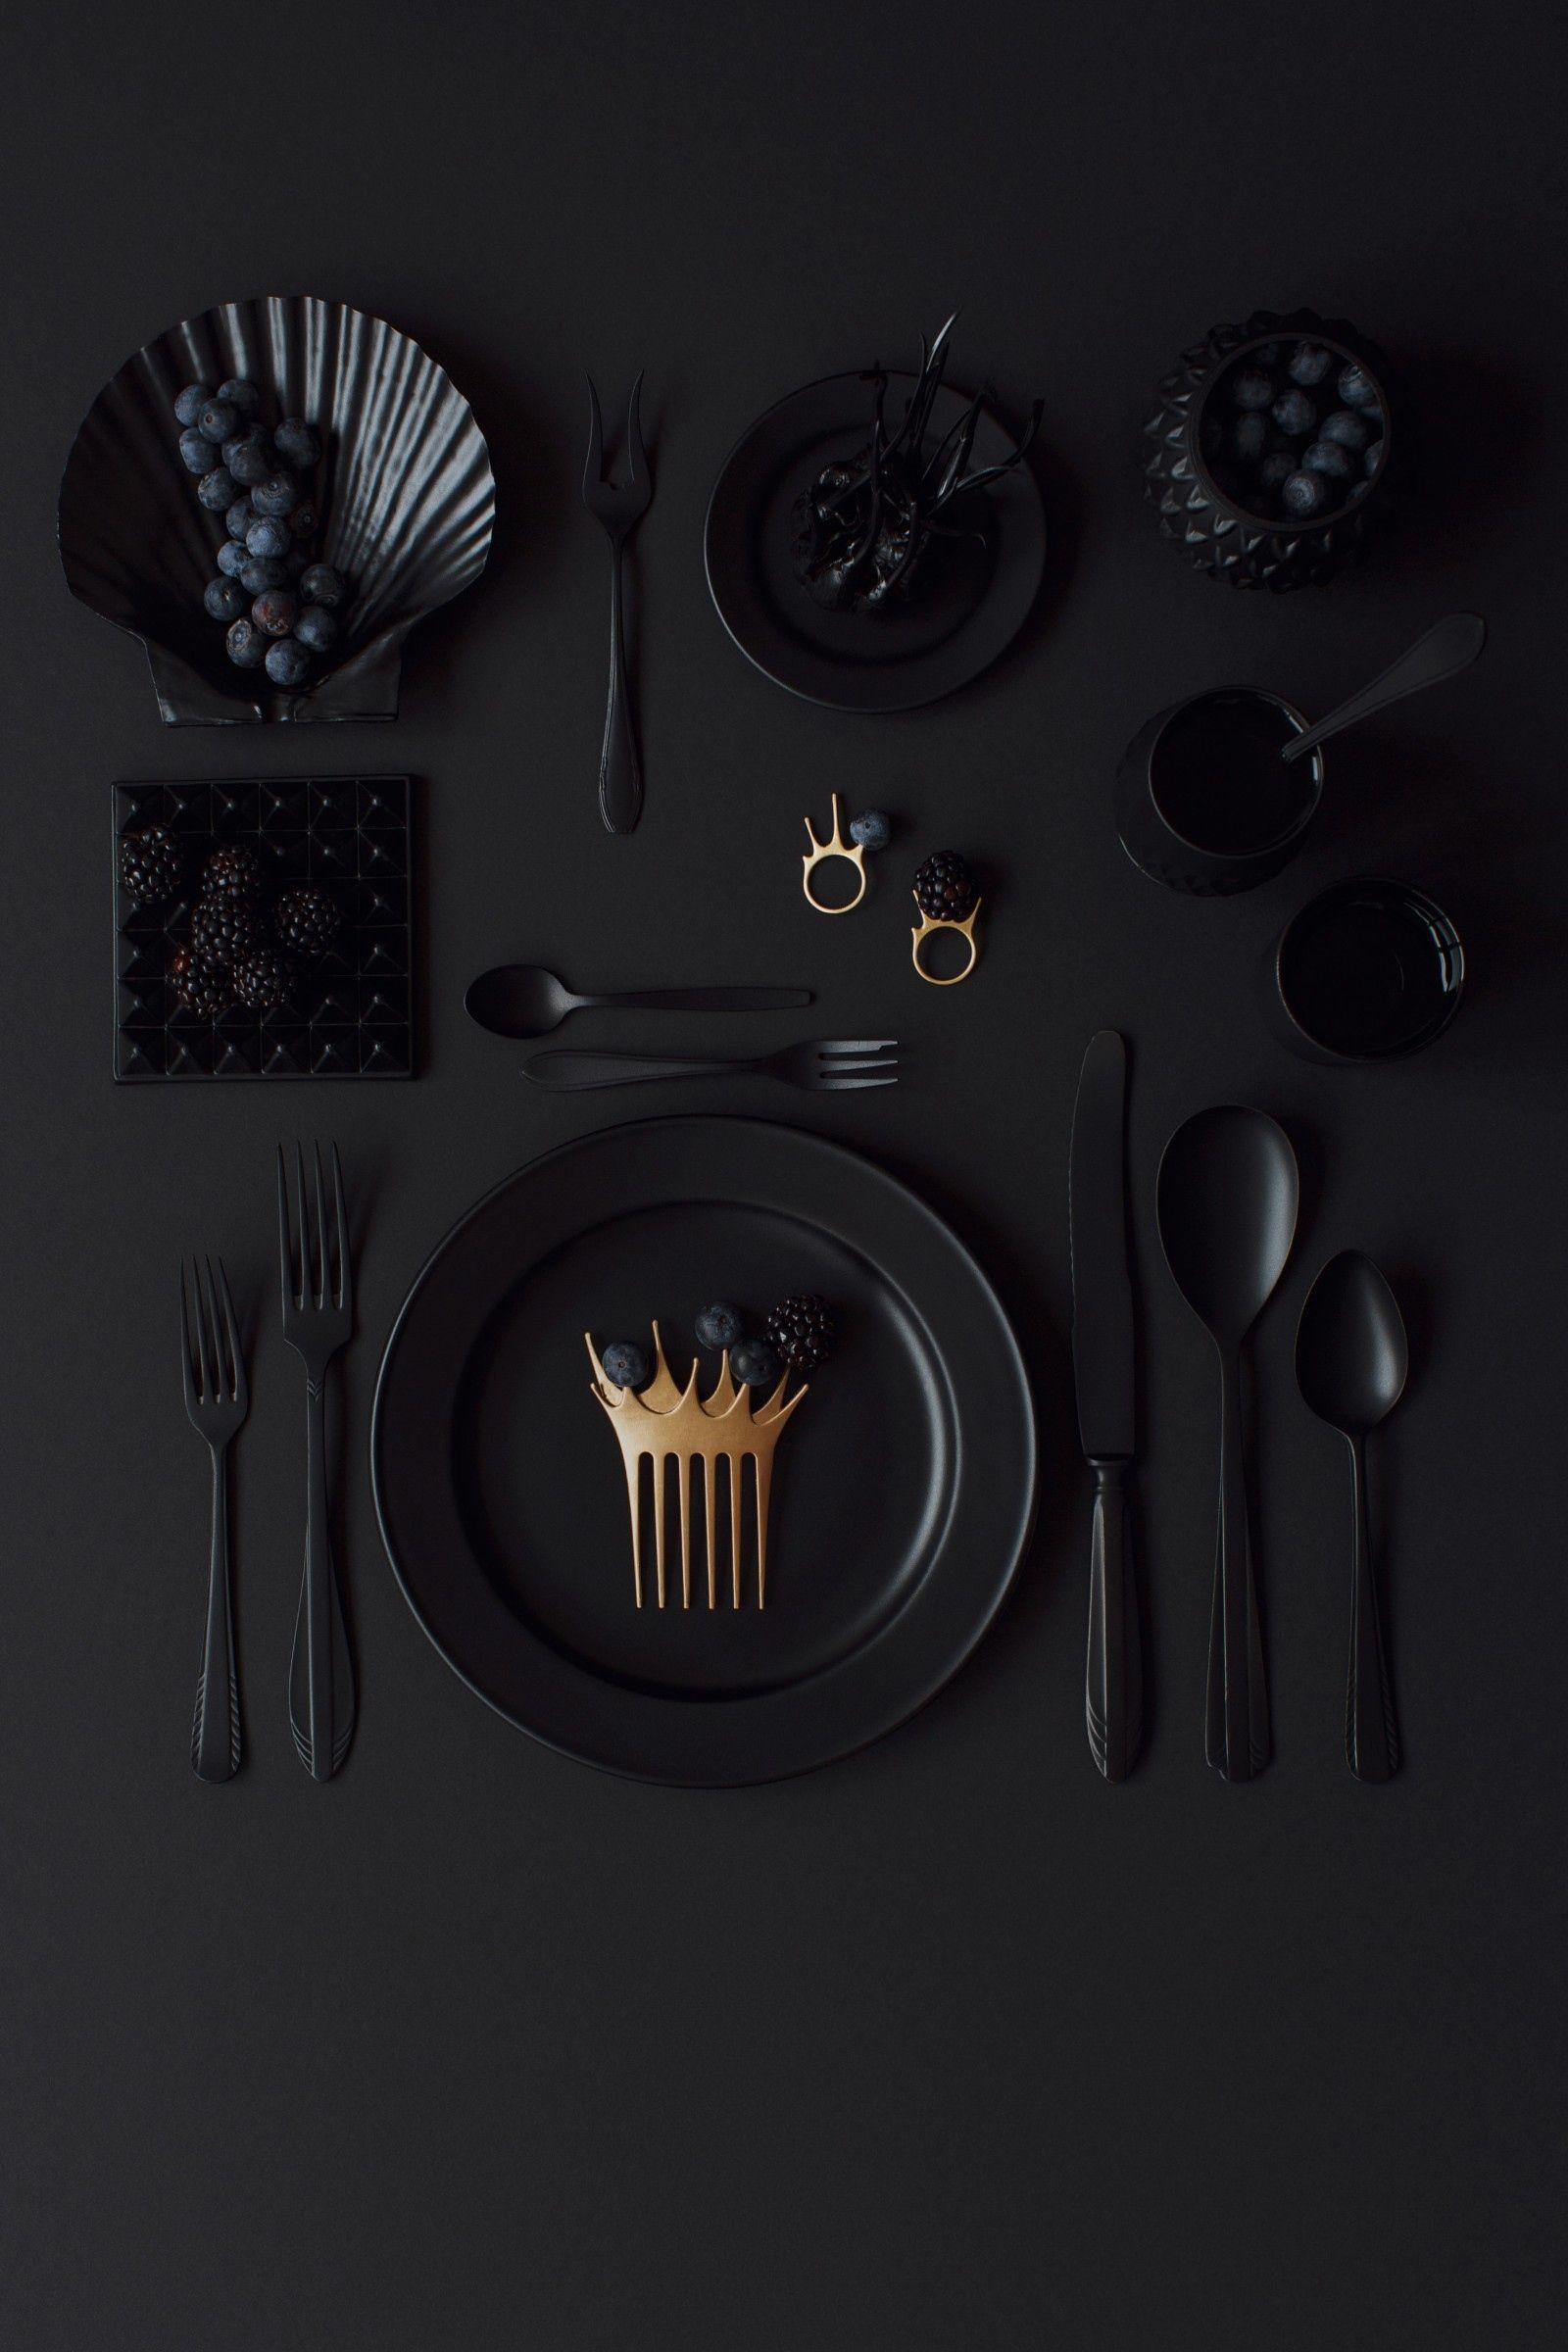 Black and gold flatware on a black table with black plates and black grapes. - Foodie, food